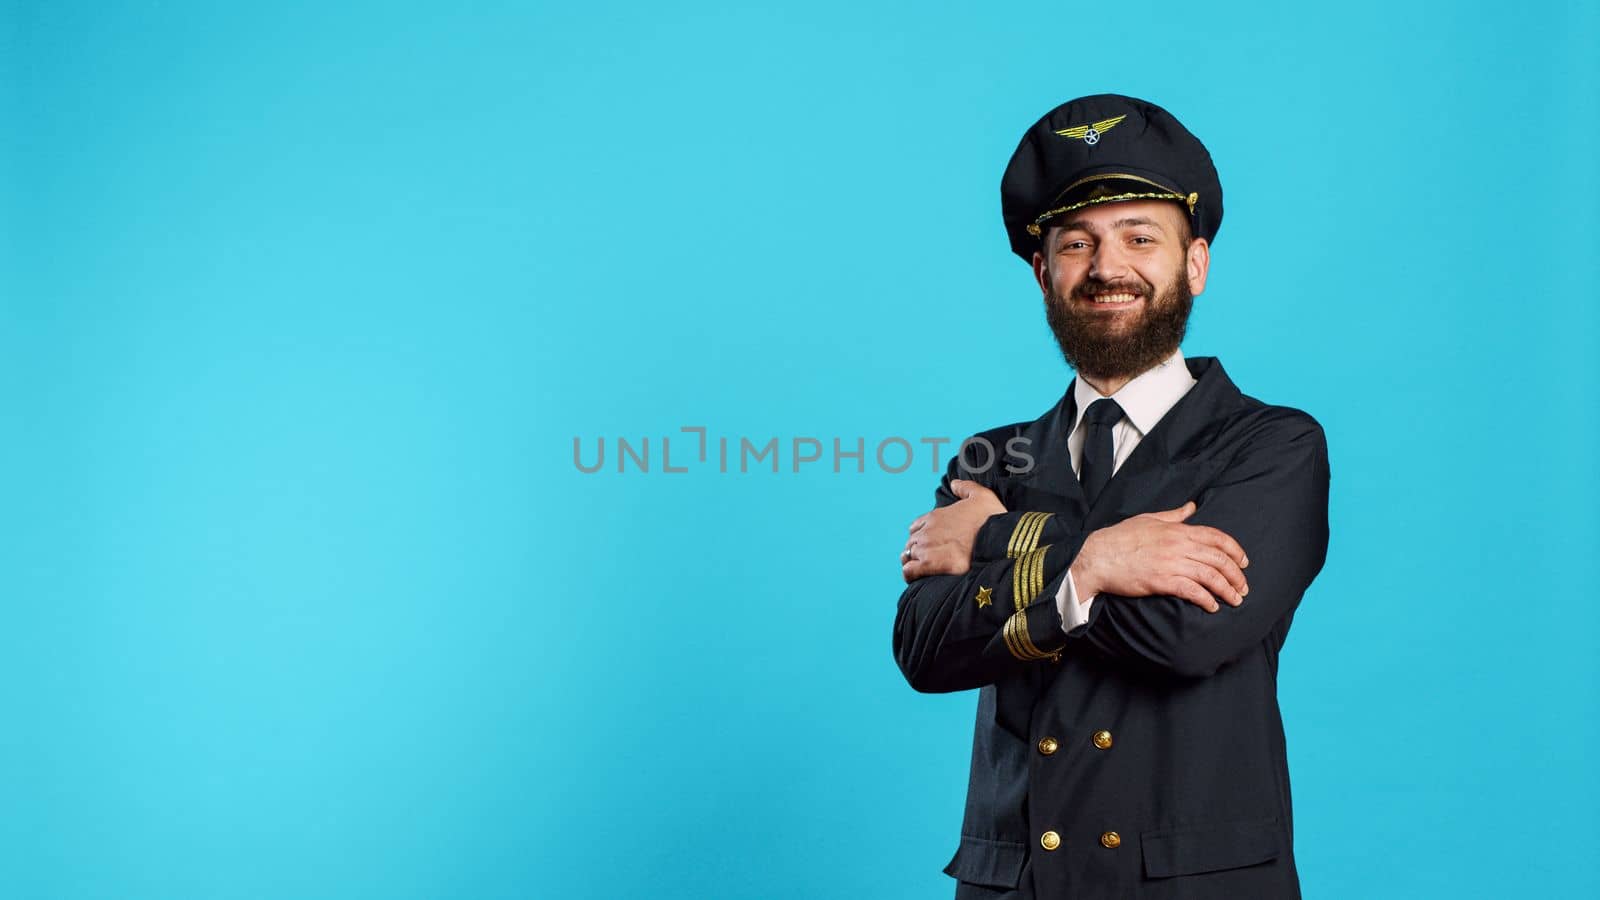 Portrait of smiling aircrew captain posing on camera, acting positive and confident with aviation uniform. Male pilot having professional occupation for air transport, flying airplane.